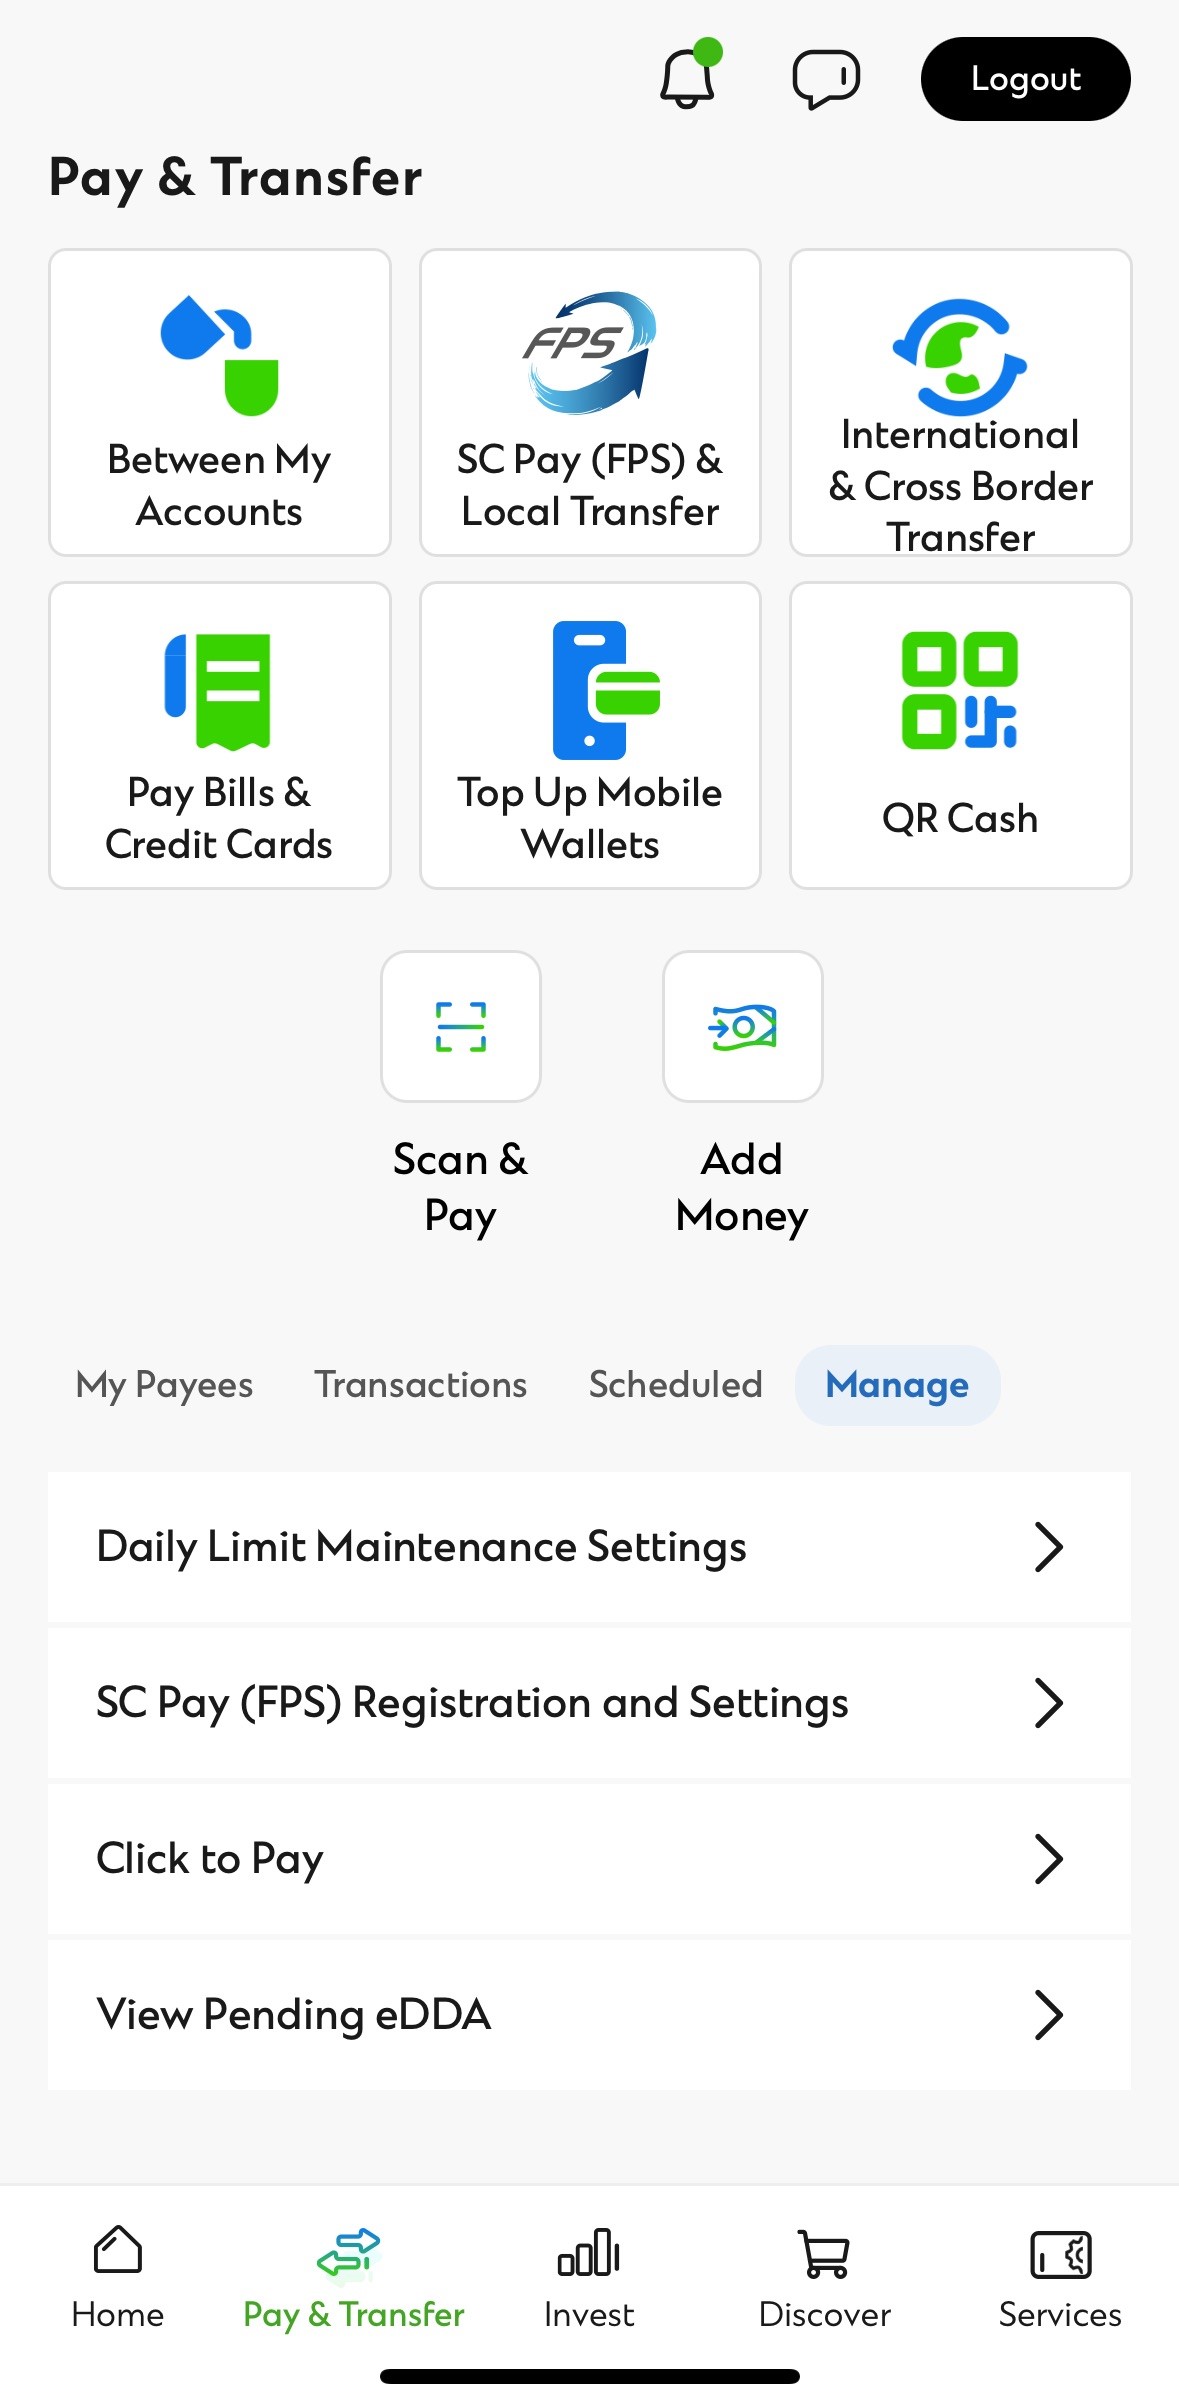 After login to SC Mobile App, go to ‘Pay & Transfer’ then select ‘Manage’ and ‘SC Pay (FPS) Registration and Settings’